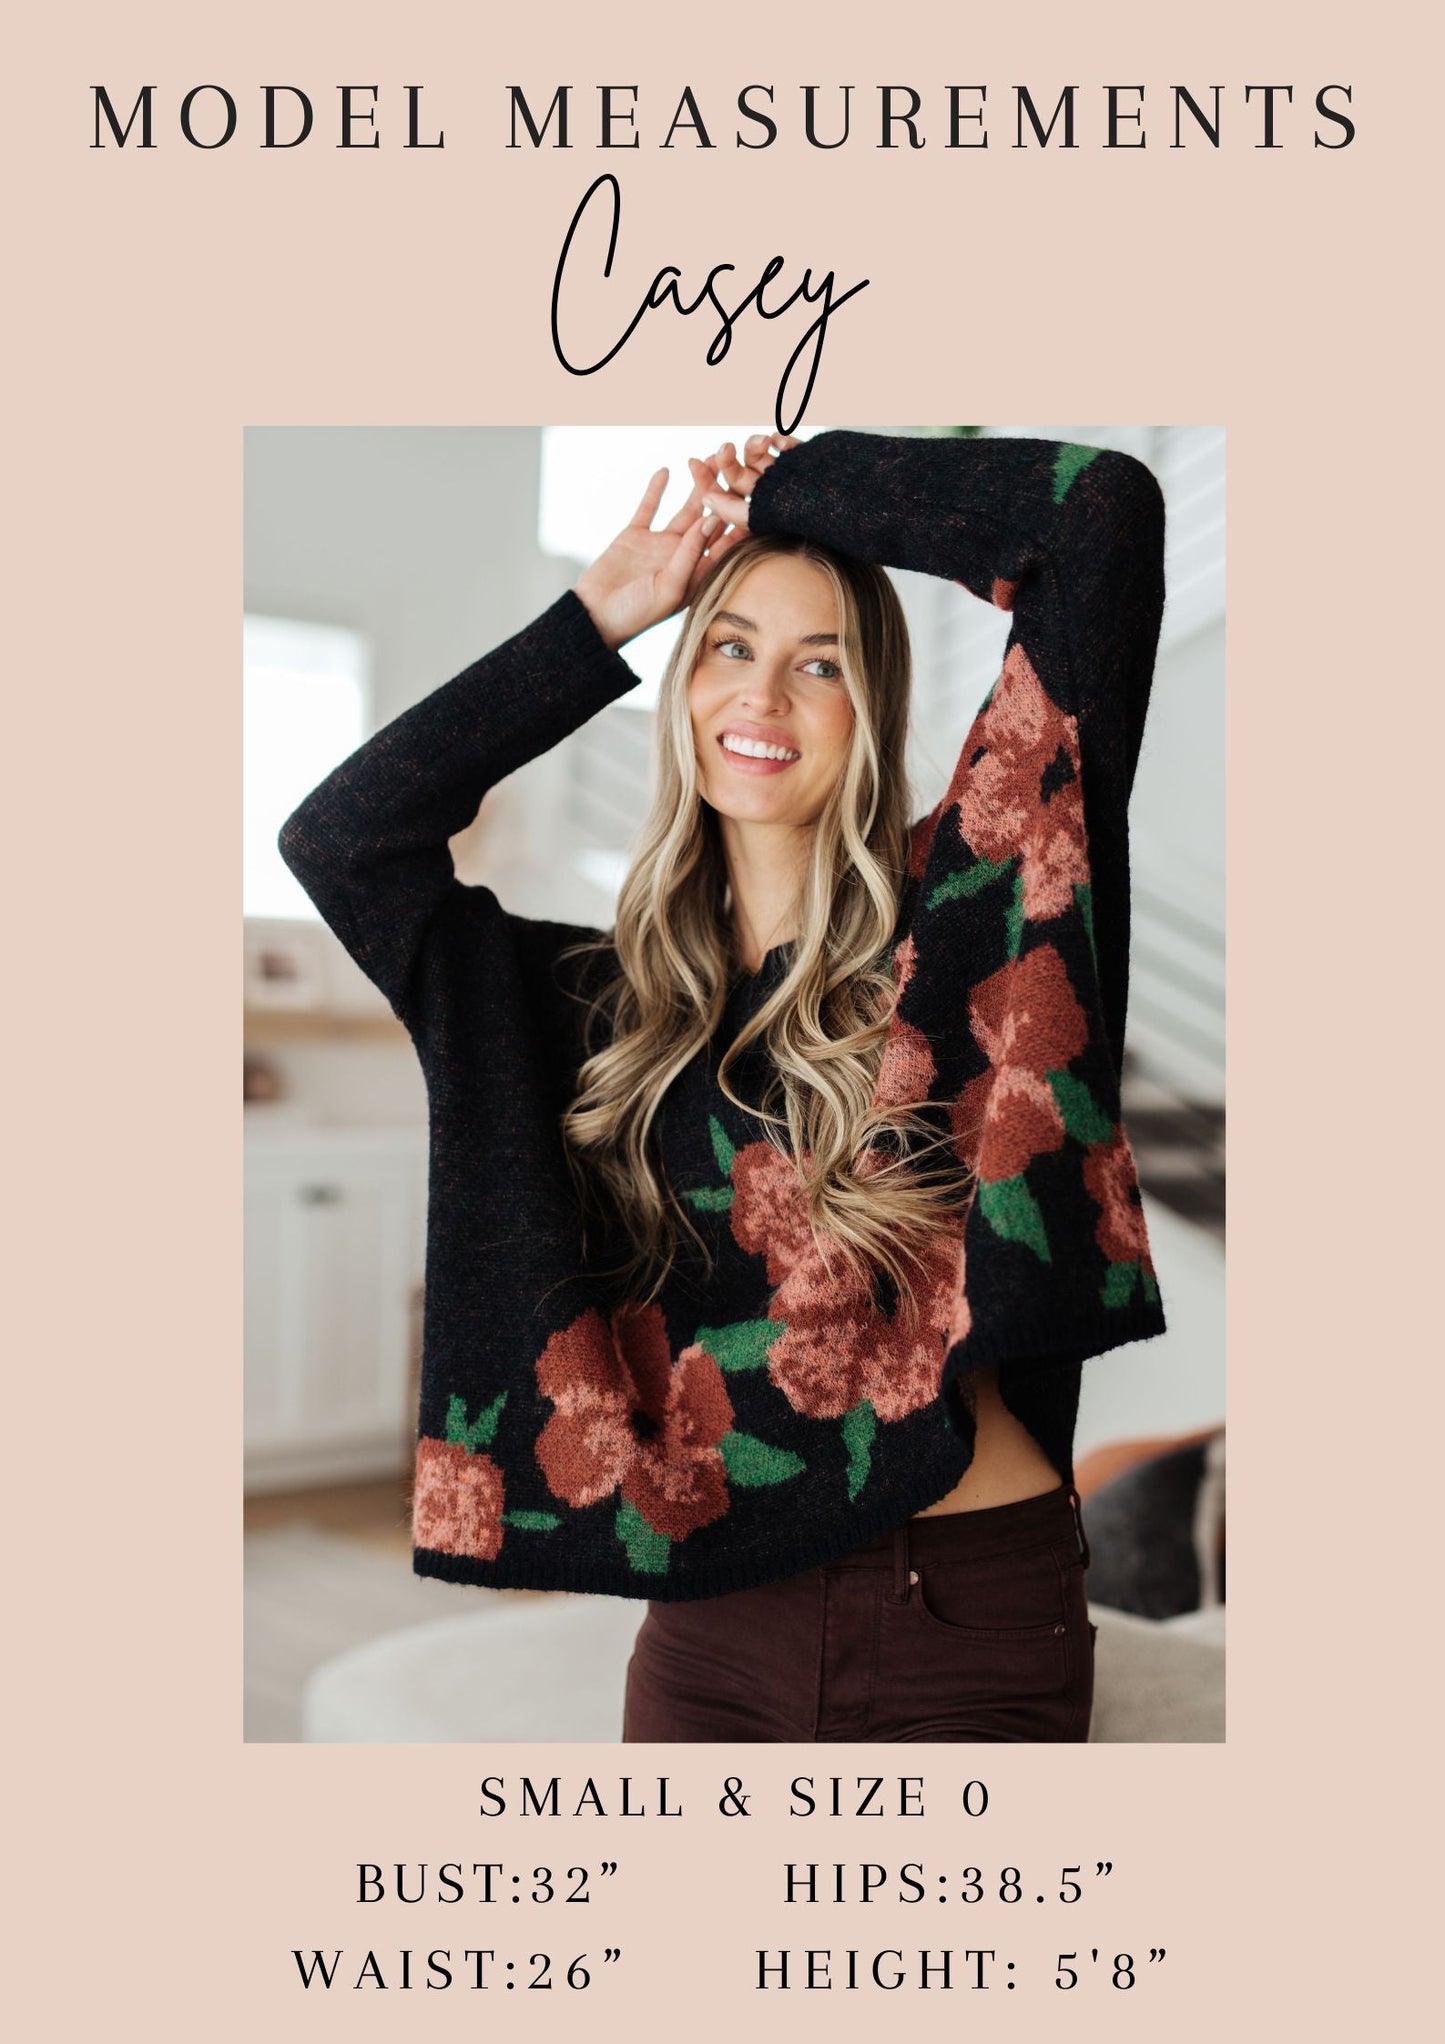 ONLINE EXCLUSIVE Falling Flowers Floral Sweater